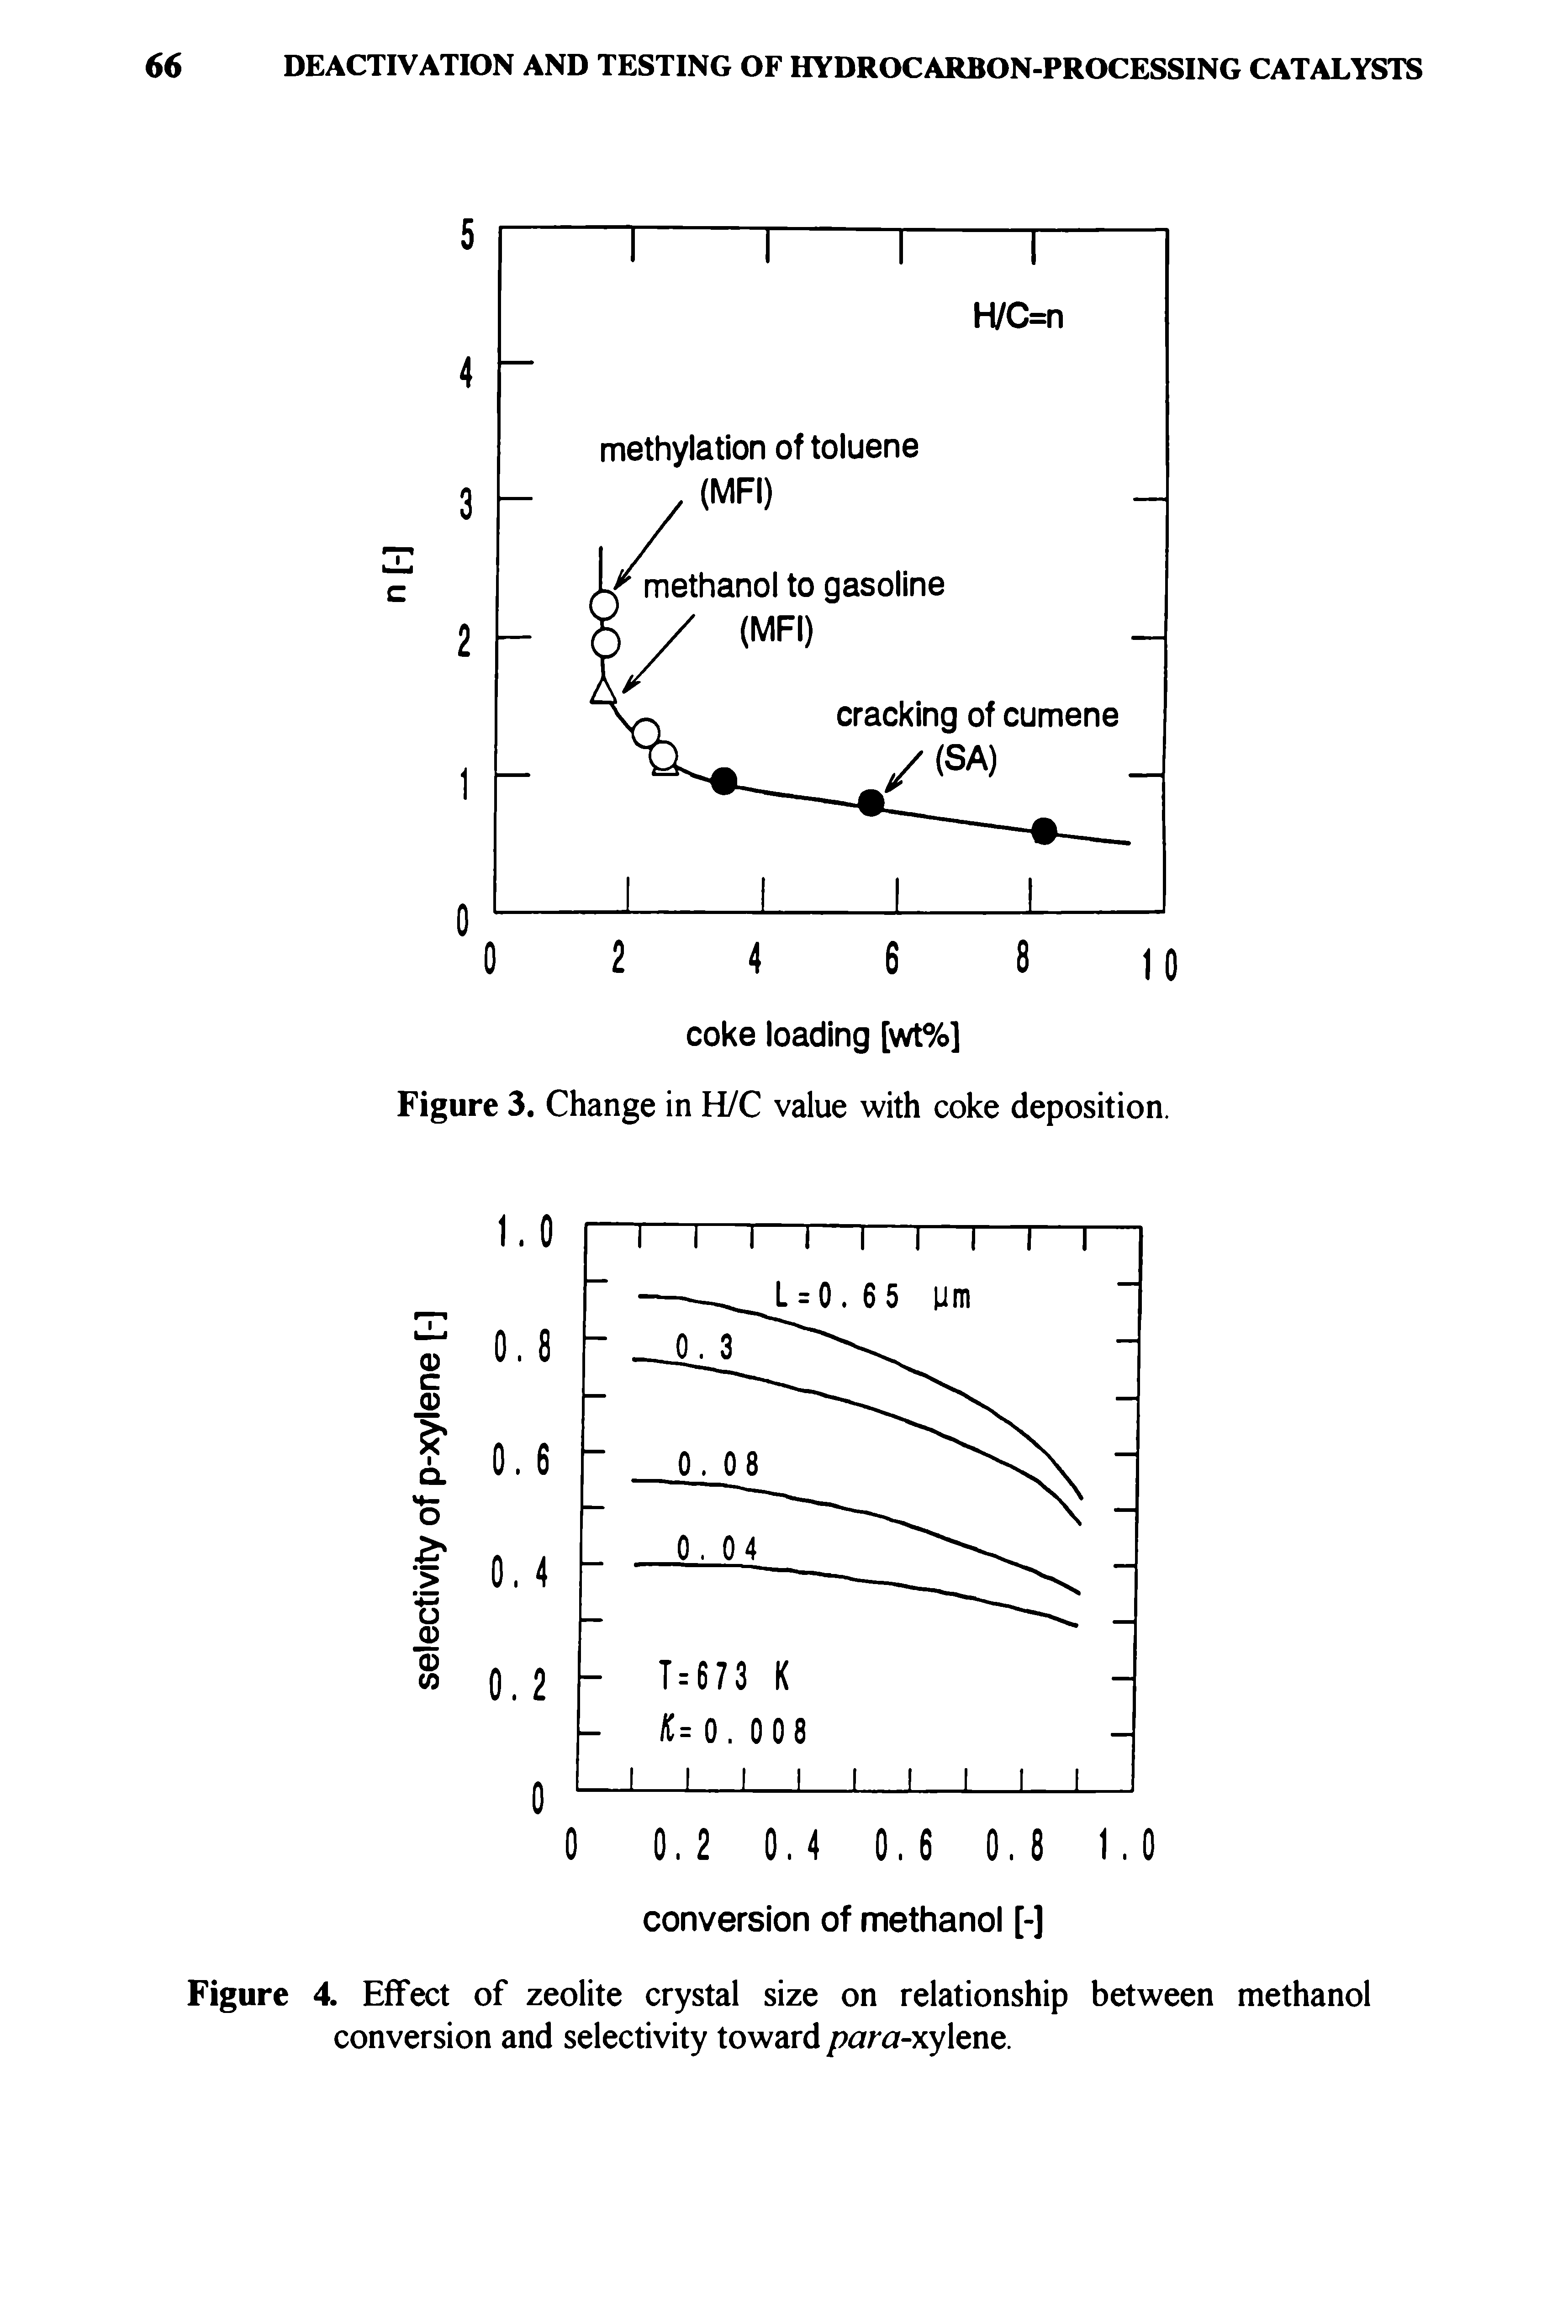 Figure 4. Effect of zeolite crystal size on relationship between methanol conversion and selectivity toward para-xy enQ.